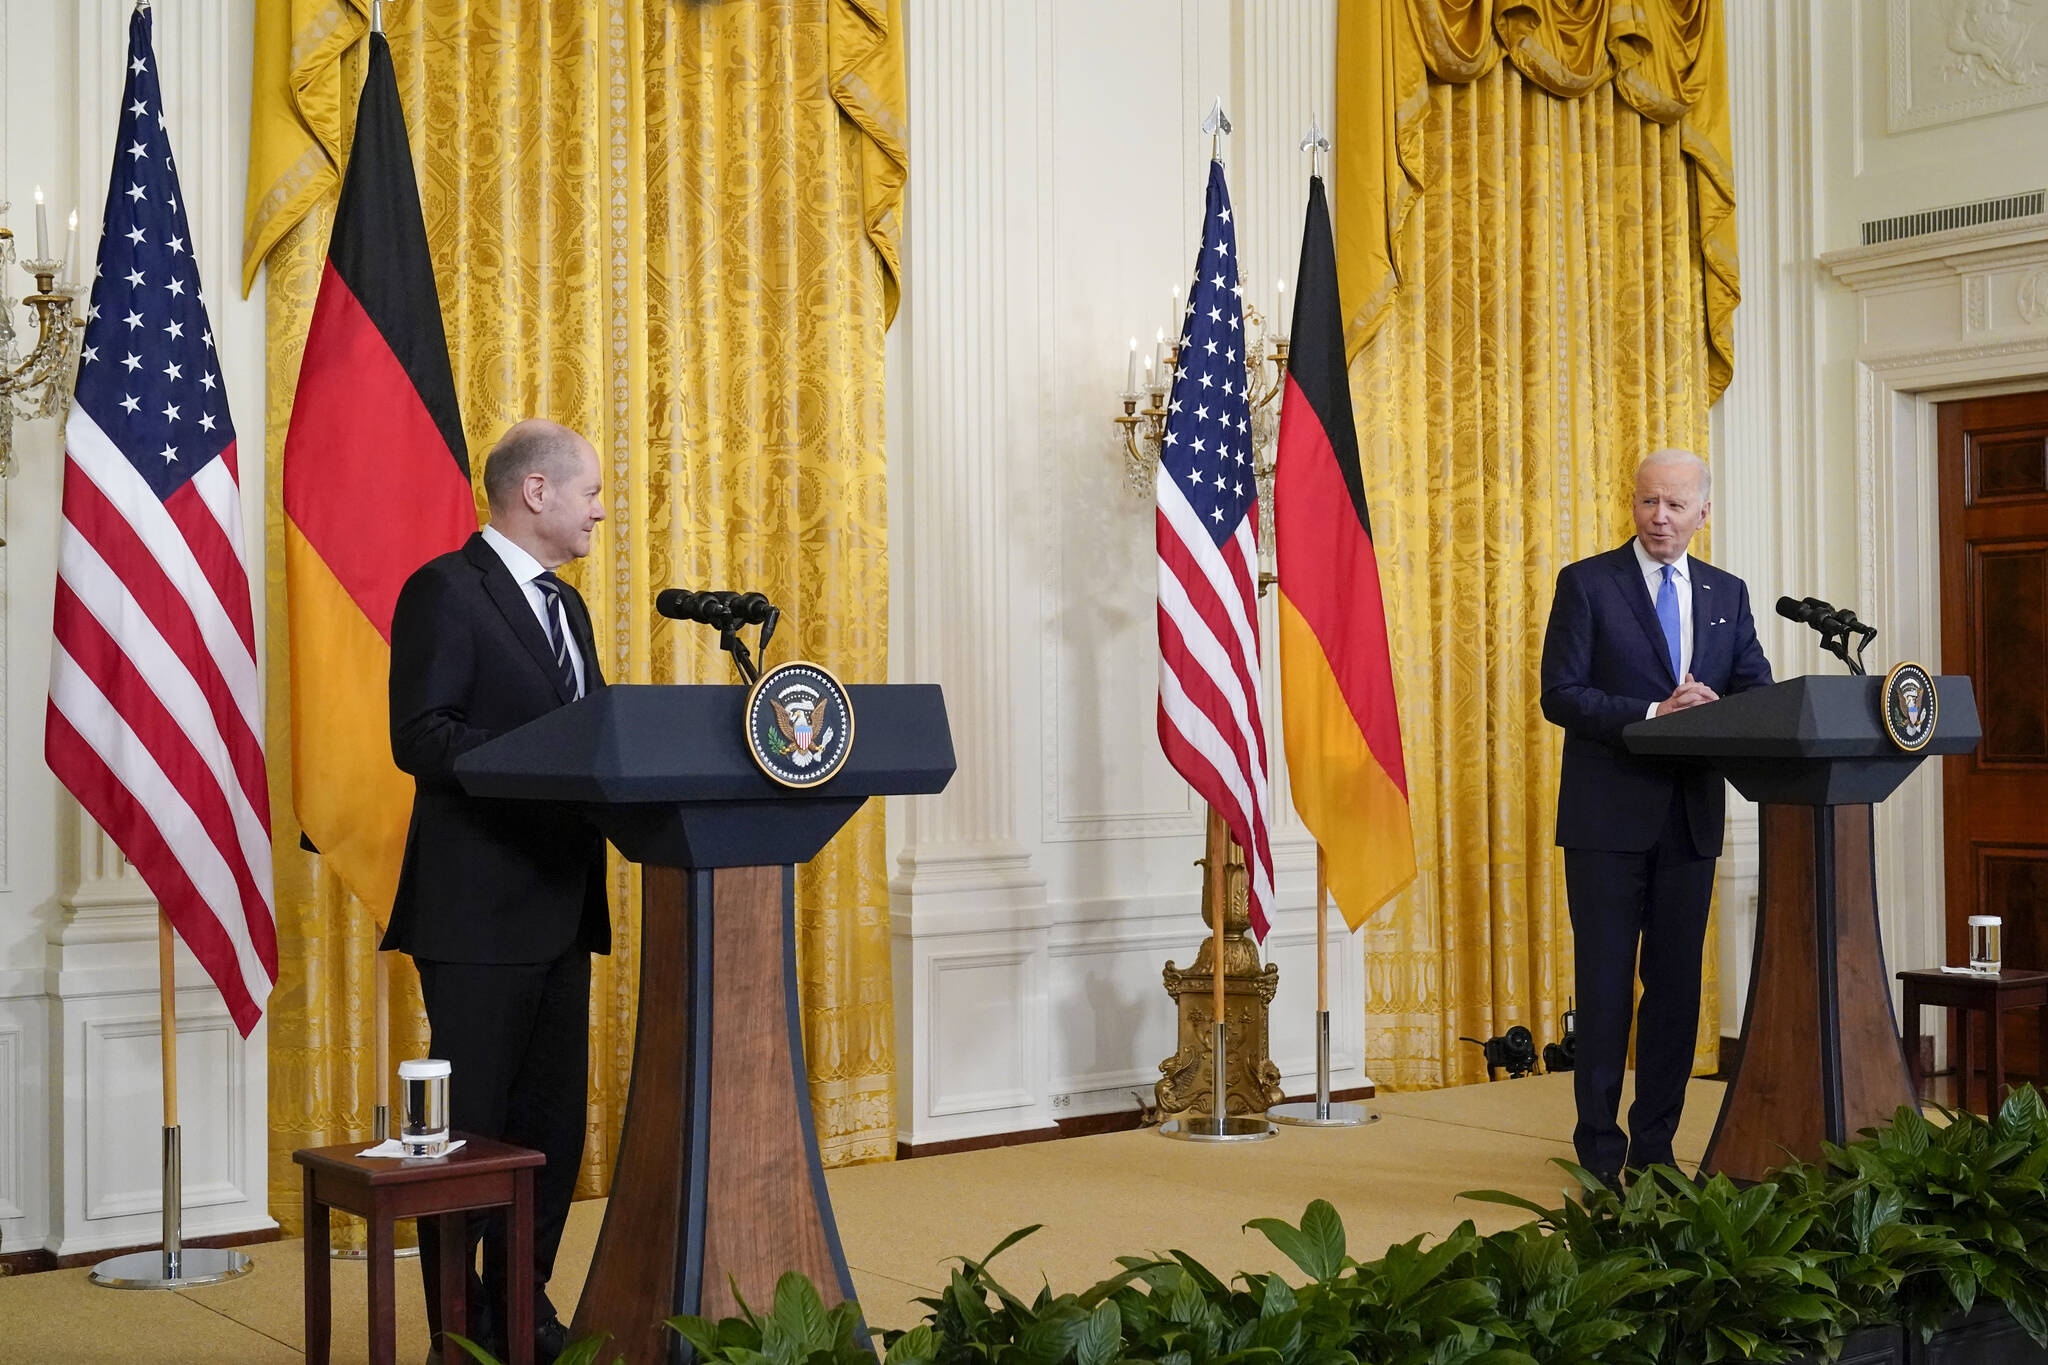 President Joe Biden speaks during a joint news conference with German Chancellor Olaf Scholz in the East Room of the White House, Monday, Feb. 7, 2022, in Washington. (AP Photo / Alex Brandon)